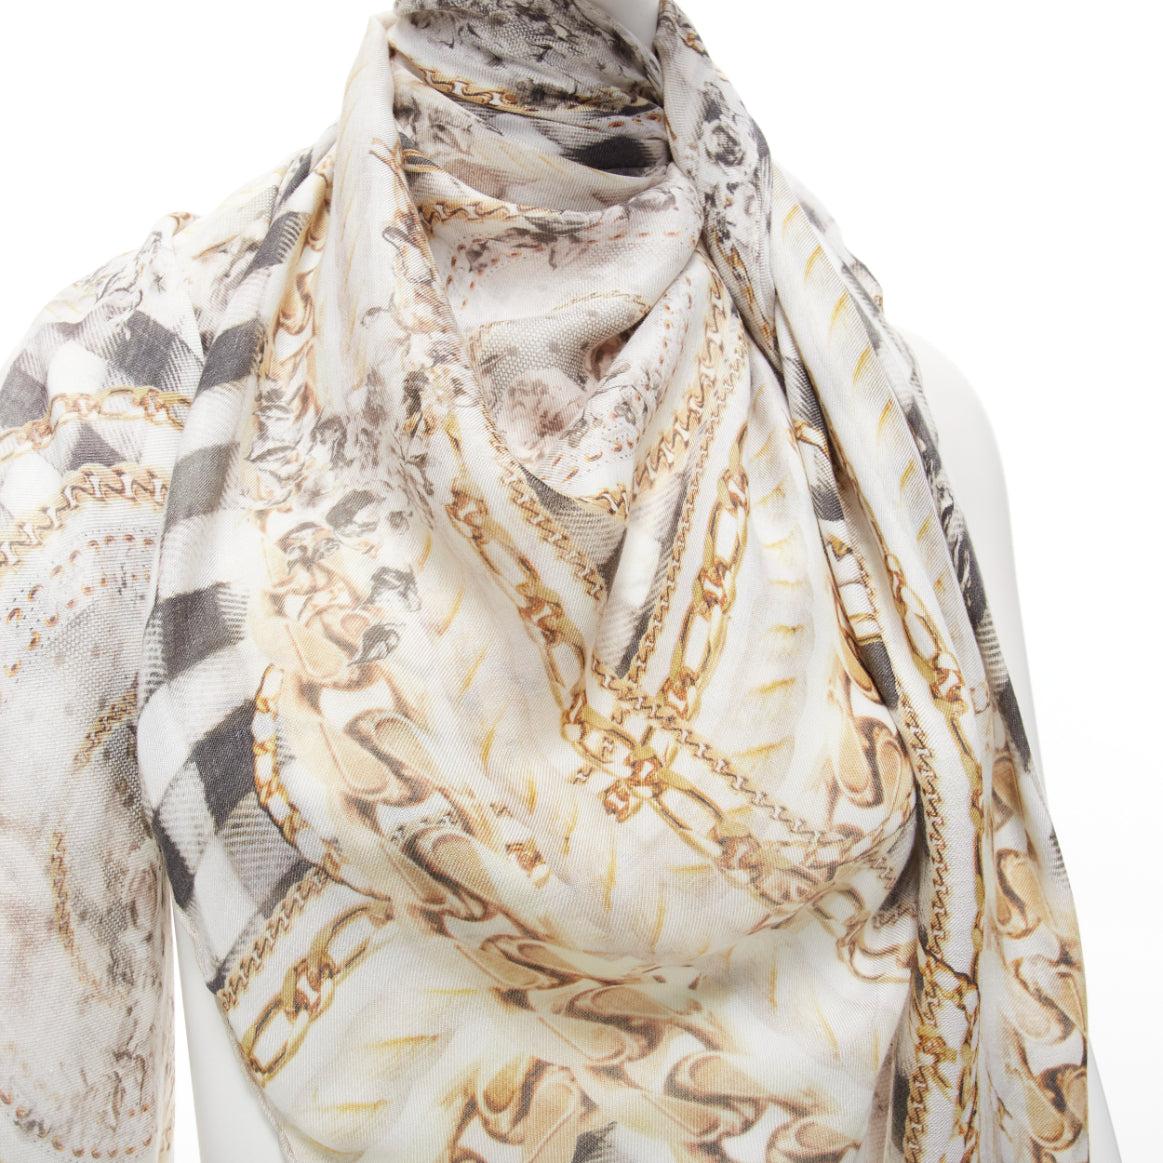 BALMAIN cream modal cashmere chain check tromp loeil print scarf
Reference: AAWC/A01157
Brand: Balmain
Designer: Olivier Rousteing
Material: Modal, Cashmere
Color: Cream, Multicolour
Pattern: Checkered
Extra Details: BALMAIN logo with chain and